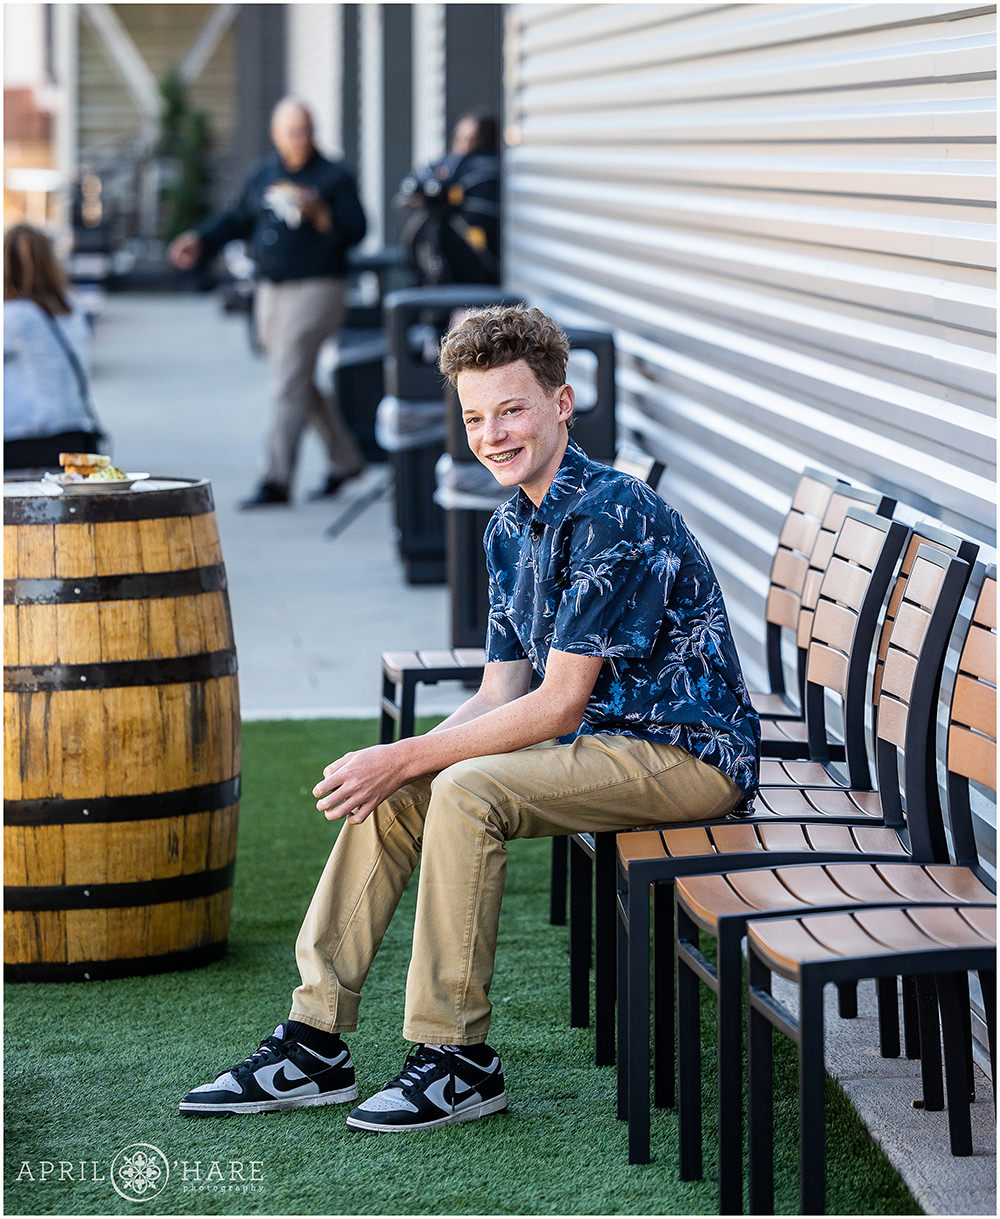 Kid hanging out on the patio at Pindustry at a bar mitzvah party